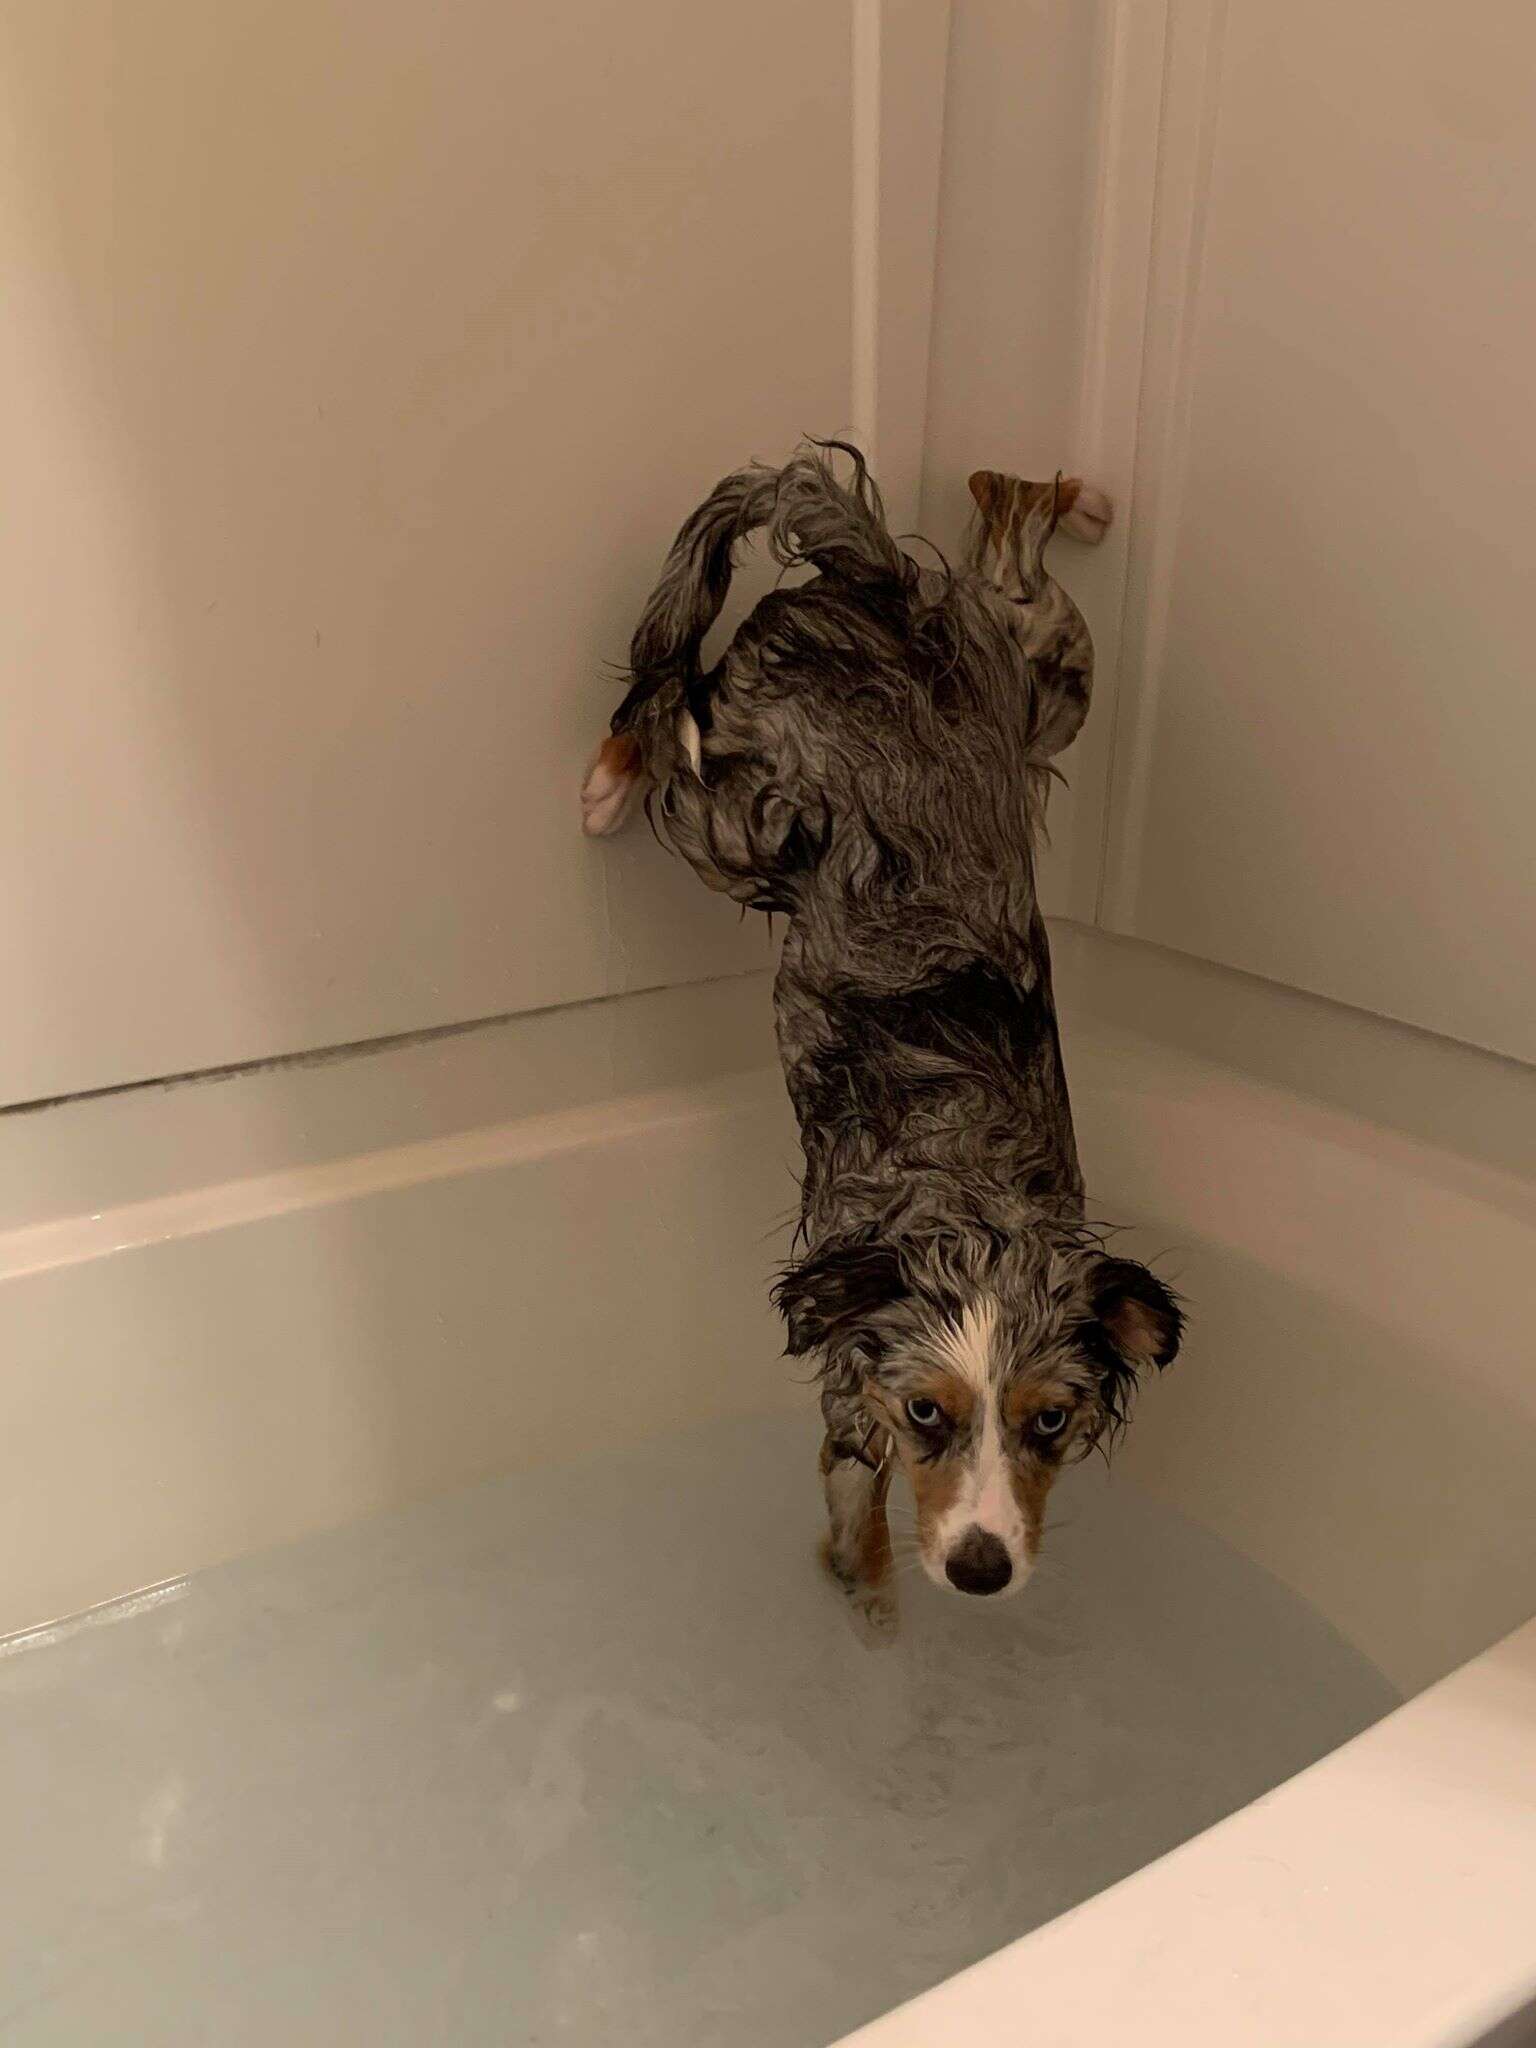 Dog doesn't like getting his butt wet in the bath